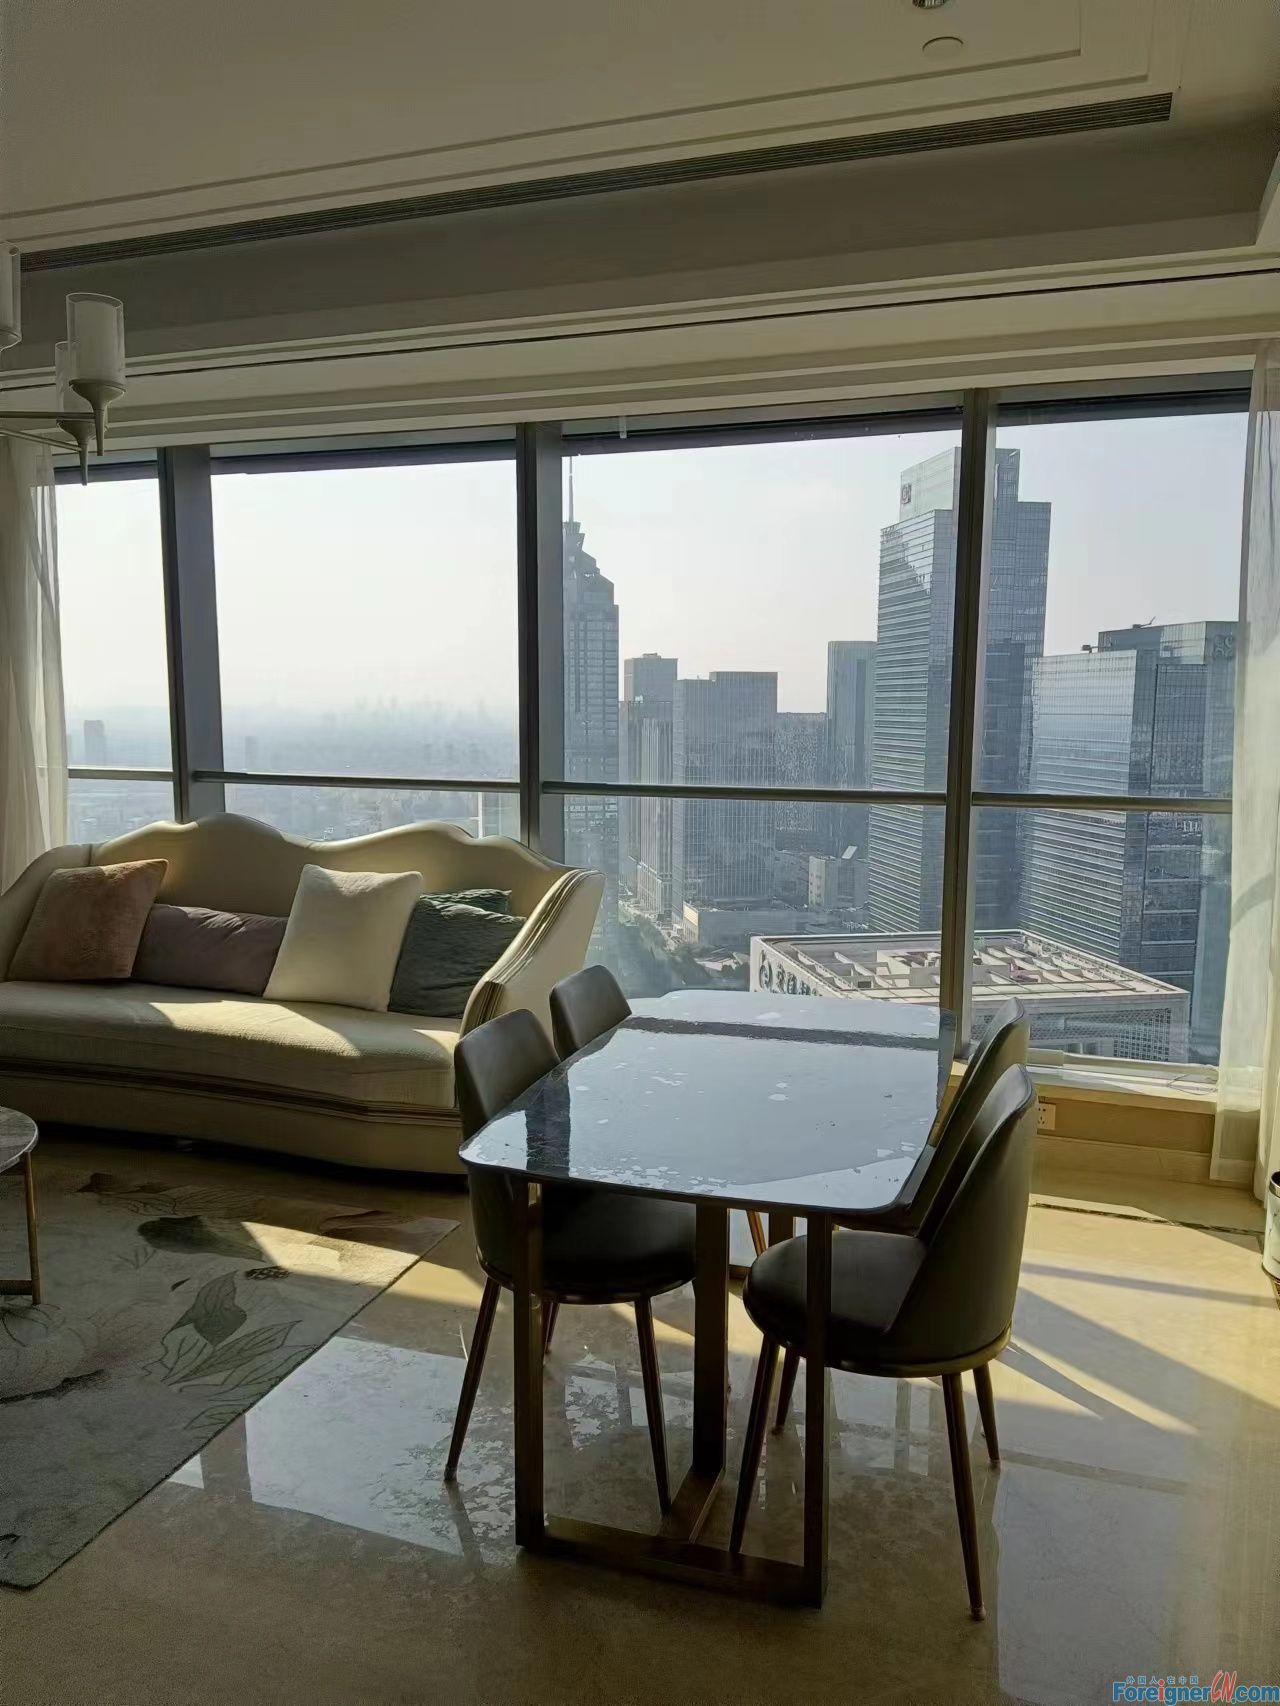 Fabulous！！！High floor apartment rent in Suzhou /2 bedrooms and 1 bathroom/bathtub/open city view/ close to Xinghai Square 